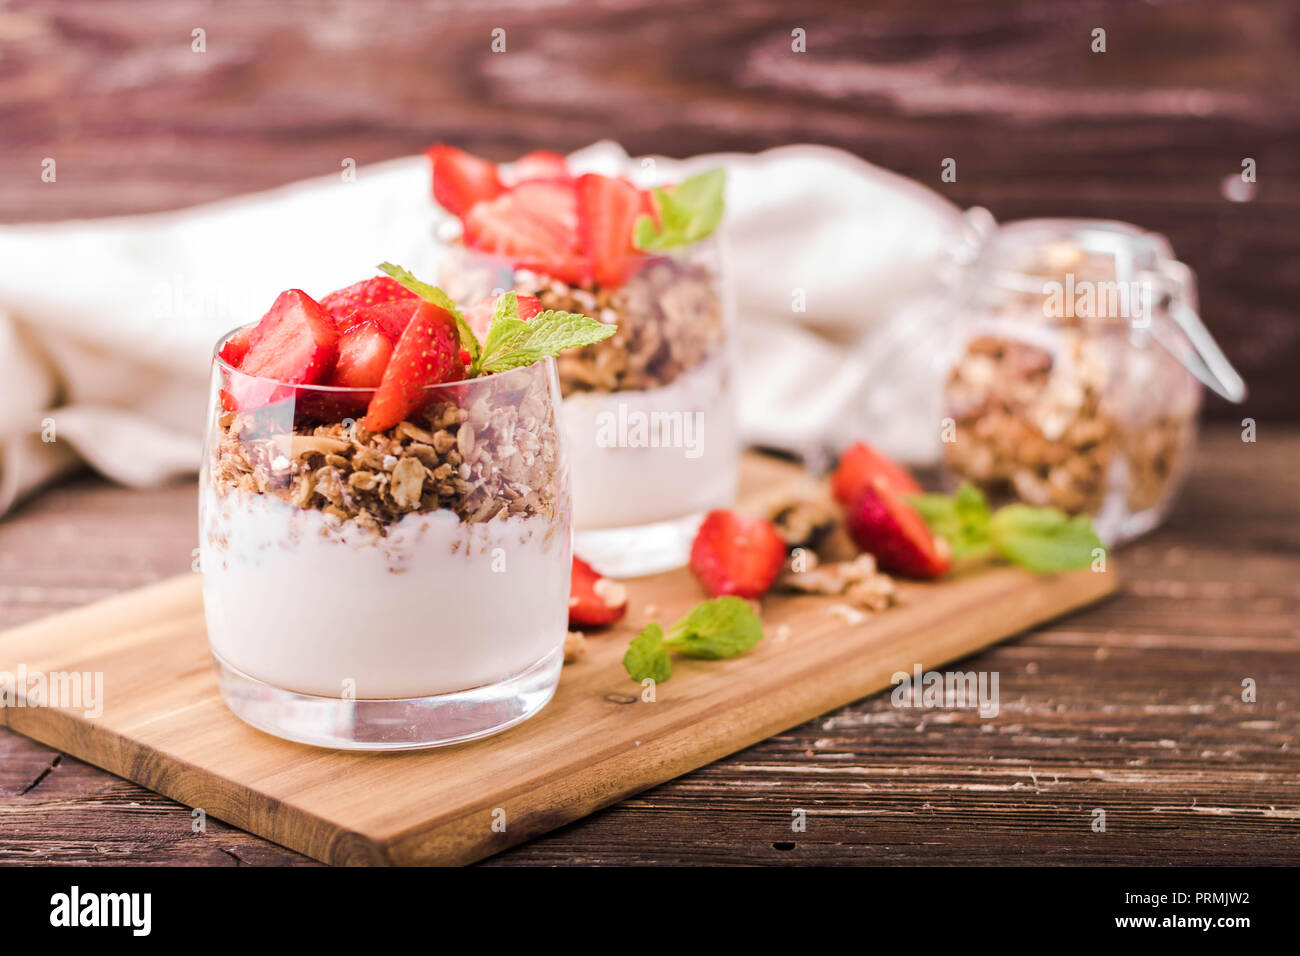 Yogurt parfait in glasses with granola, strawberries and mint leaves. On wooden board. Healthy breakfast concept. Rustic wooden table background. Stock Photo